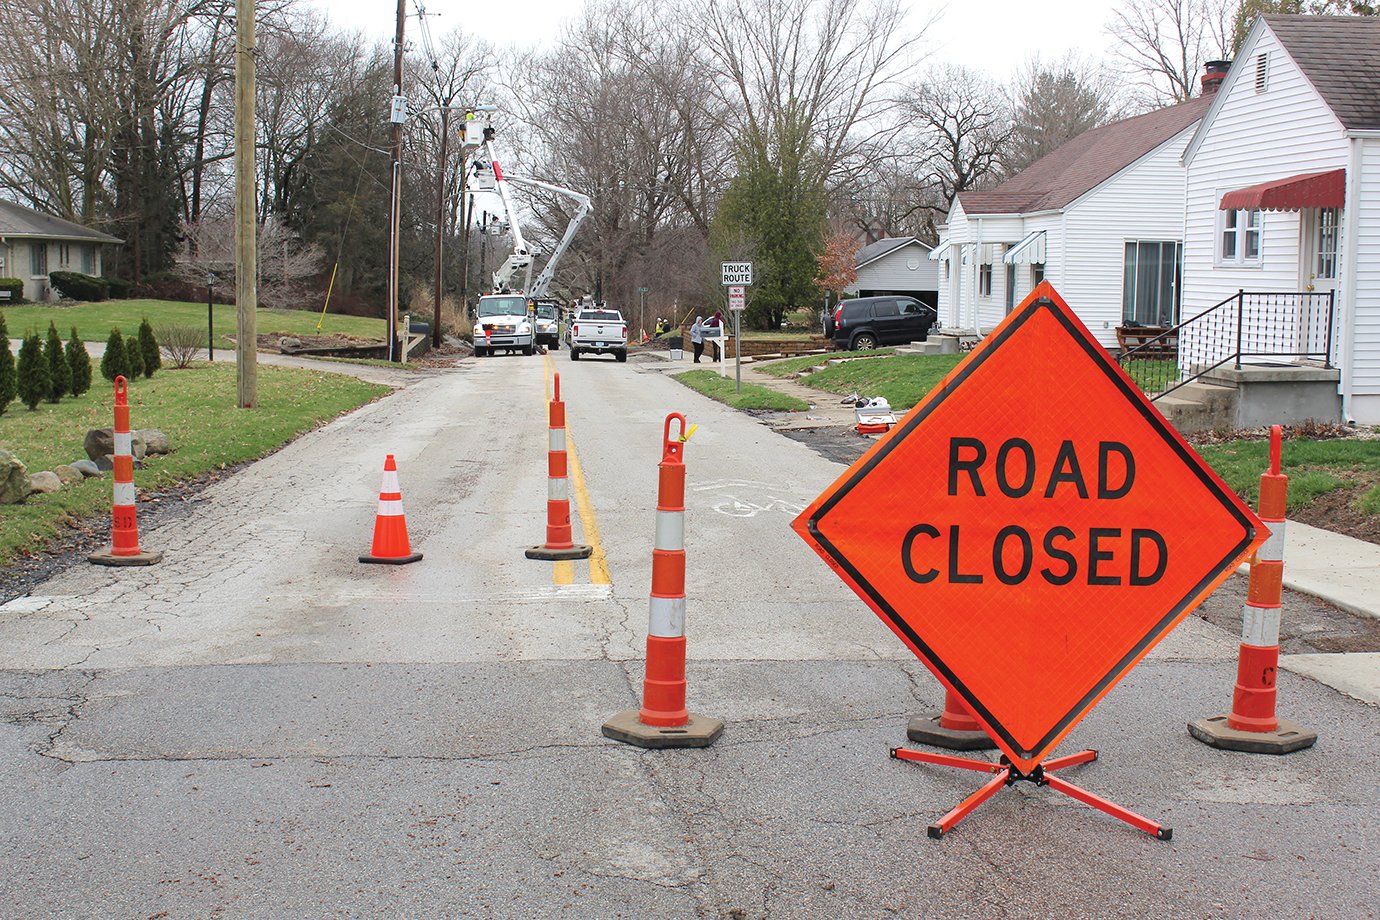 The start of Country Club Road at Barr Street formed the east end of a temporary road closure Tuesday morning following a series of downed power lines caused by a falling tree. The road was closed from about 8:30 a.m. through noon, roughly two city blocks west to Glenn Street.